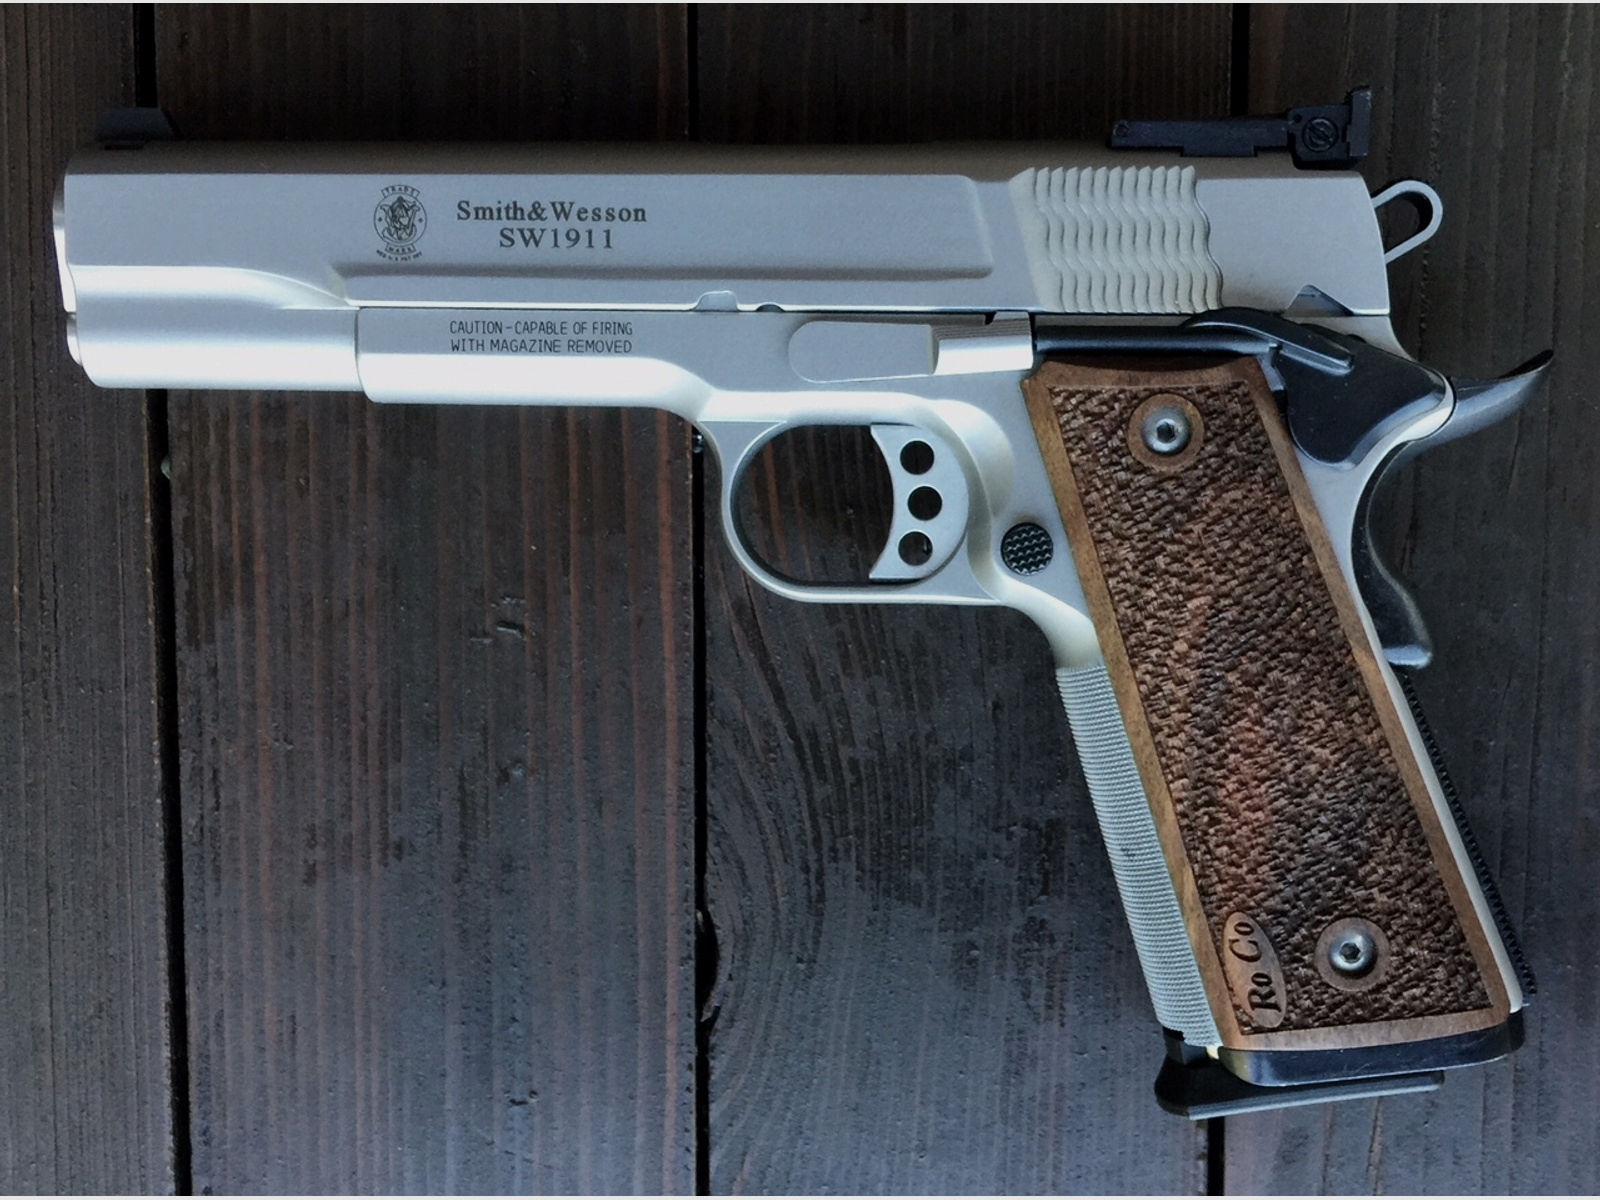 Smith & Wesson - 1911 AS Pro Series 9 Luger